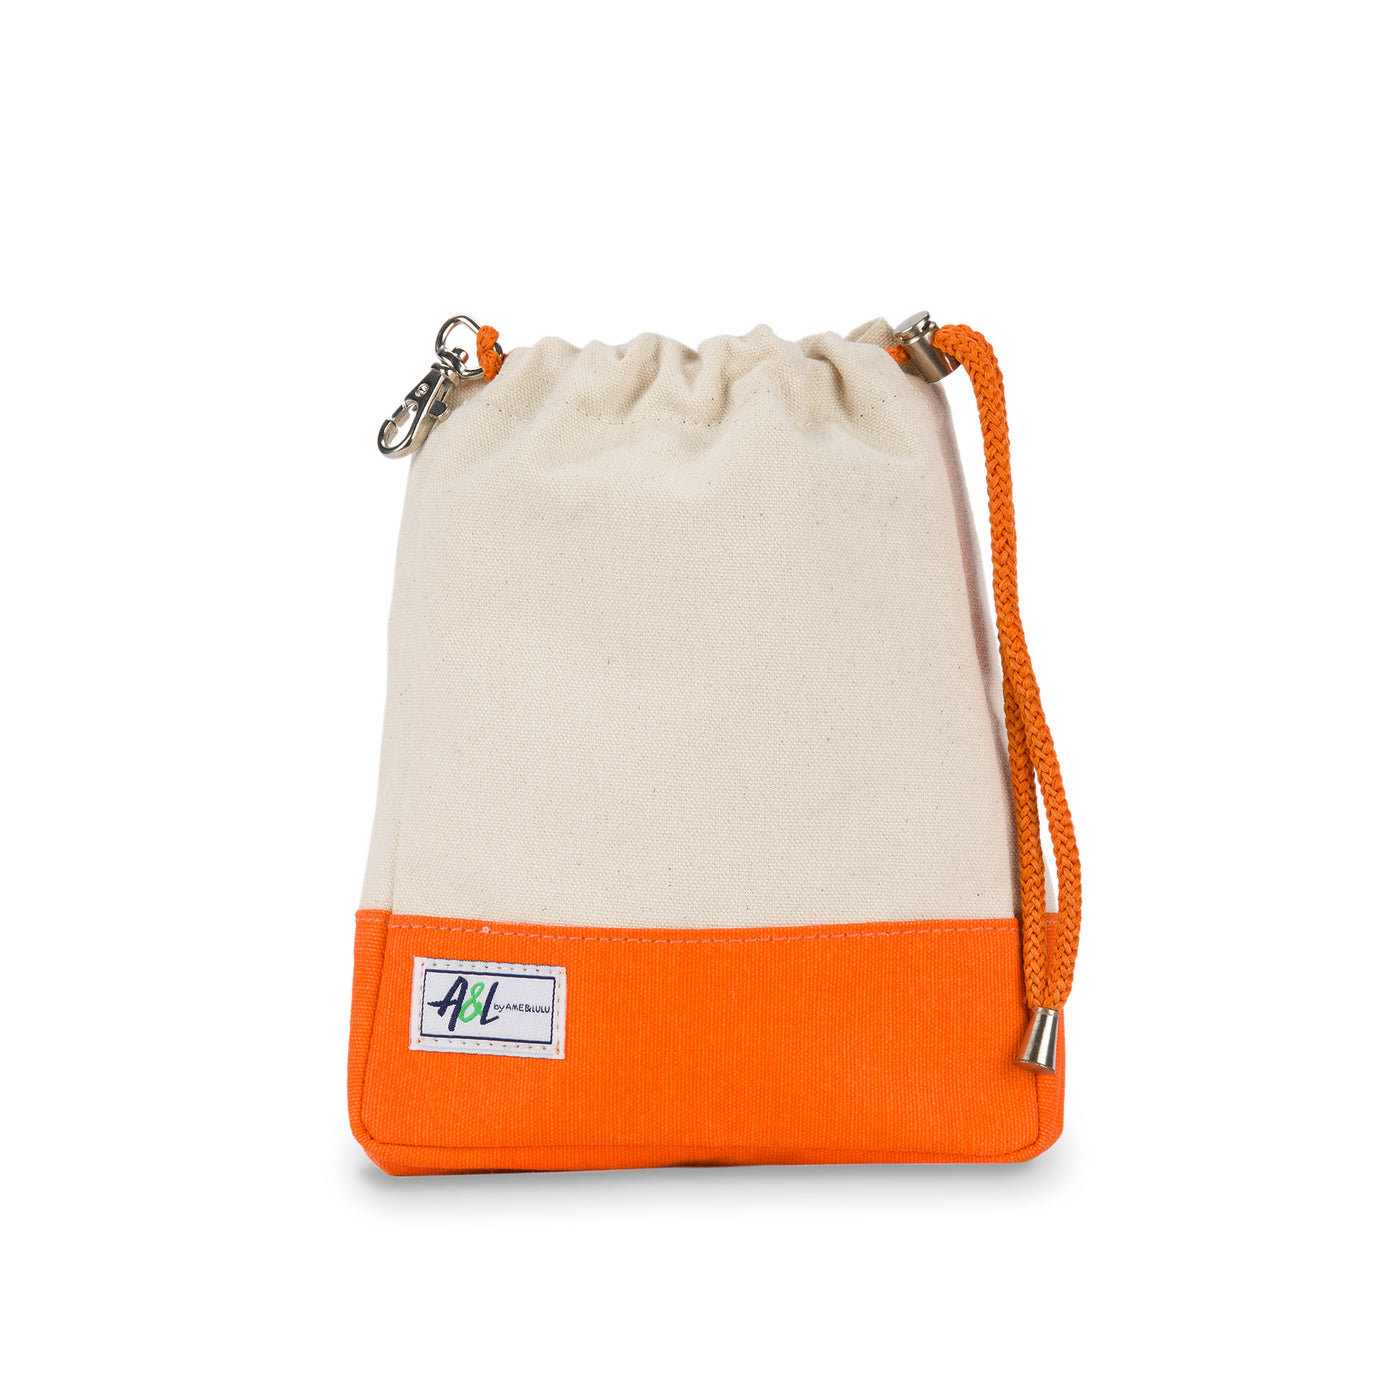 tan canvas small drawstring pouch with orange trim.